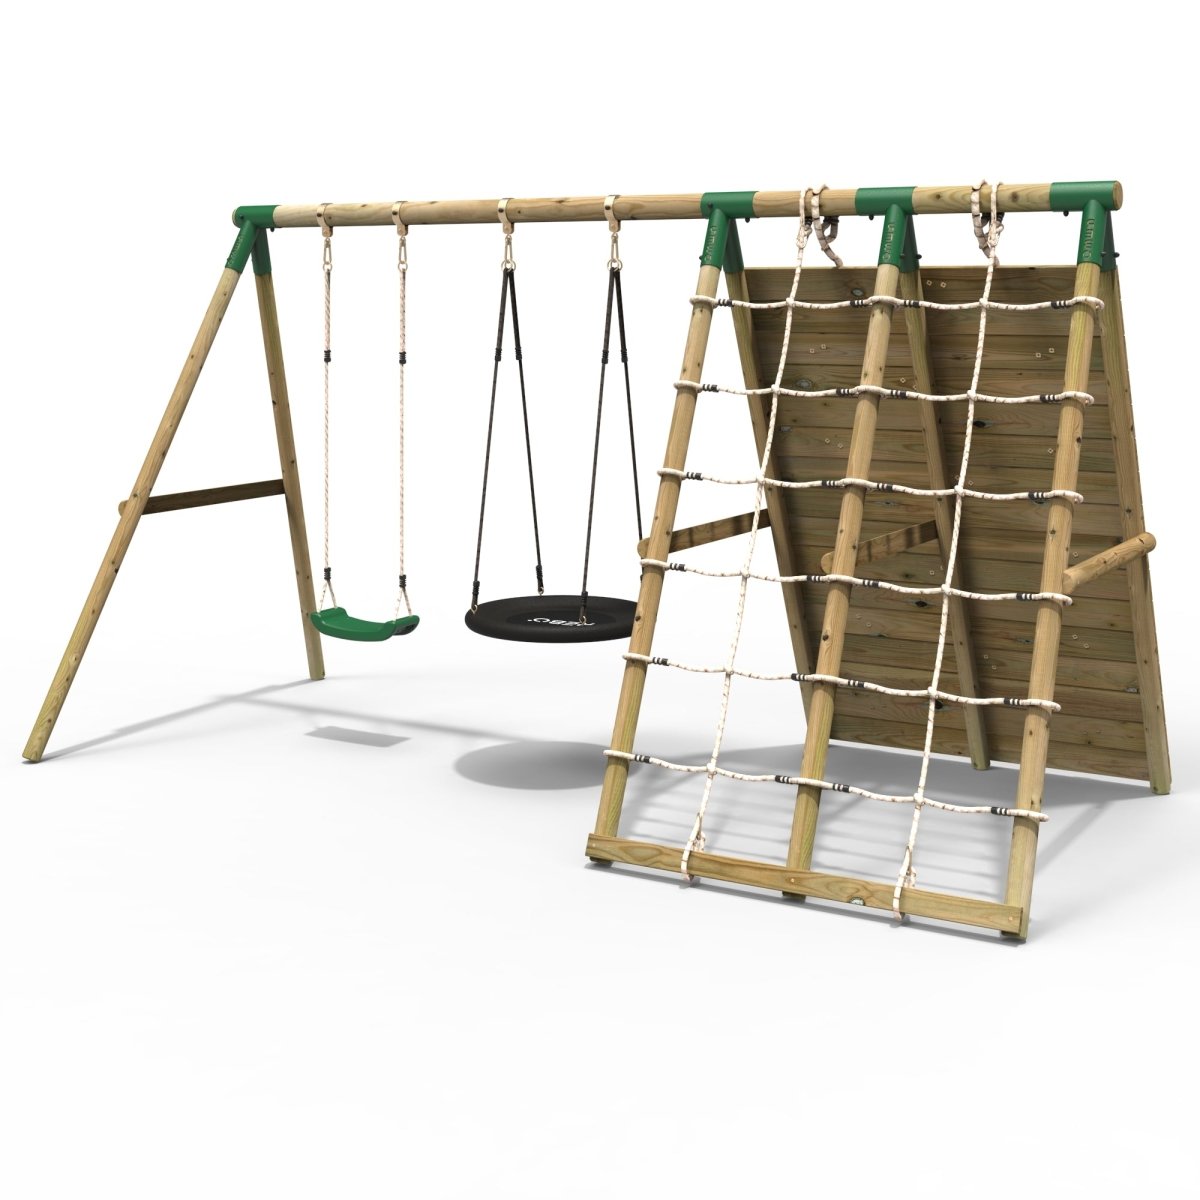 Rebo Beat The Wall Wooden Swing Set with Double up & Over Climbing Wall – Spire